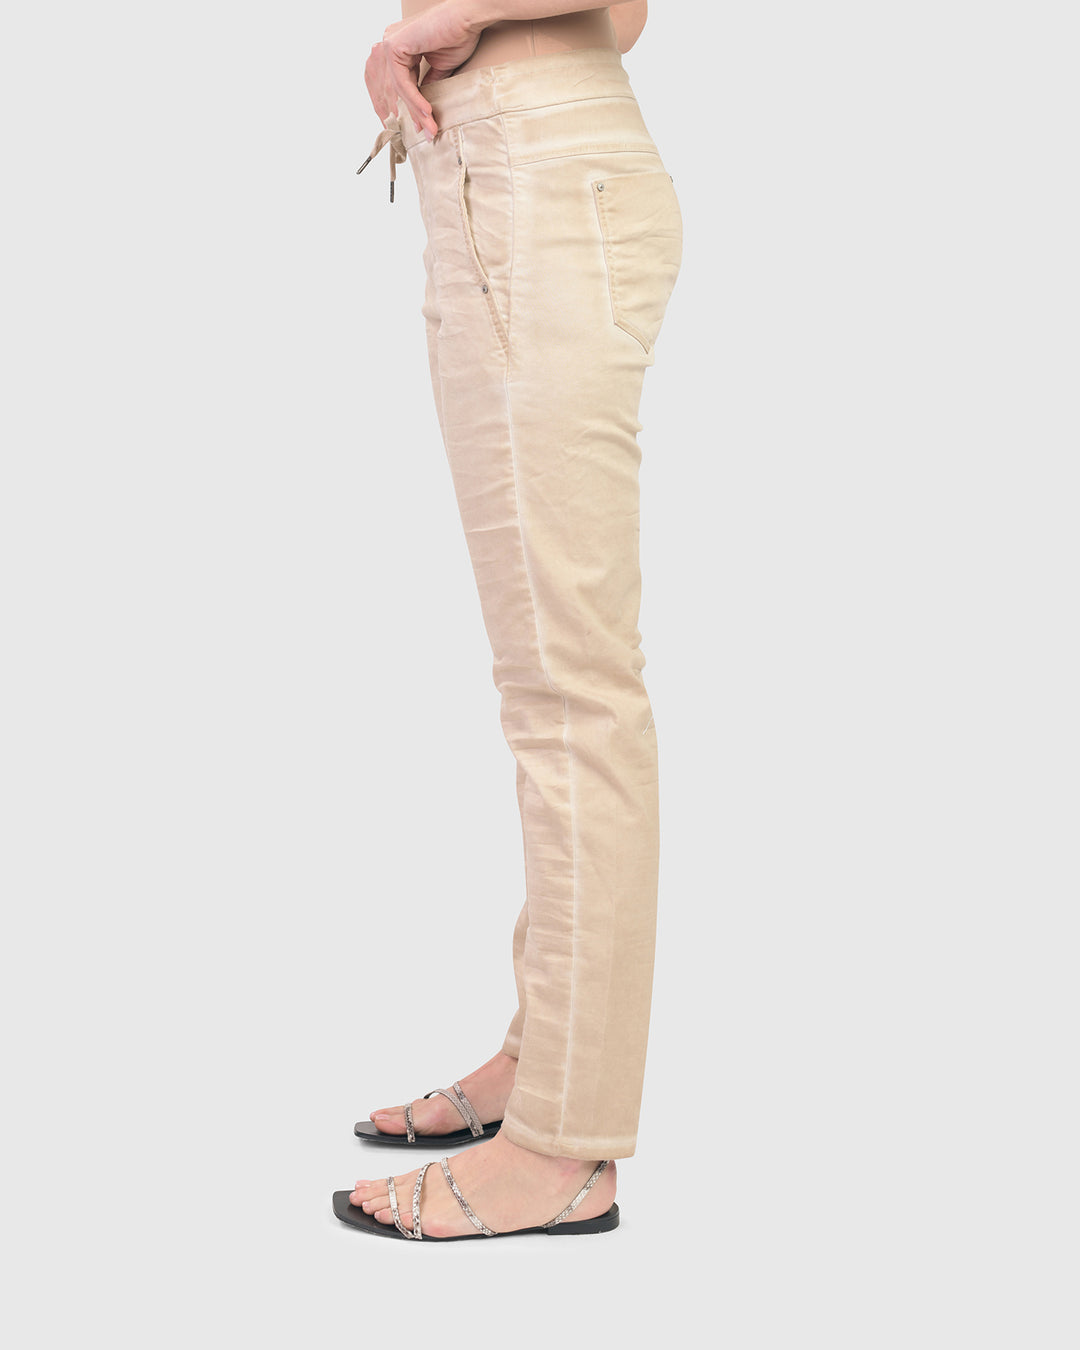 Distressed Iconic Stretch Jeans, Sand Wash